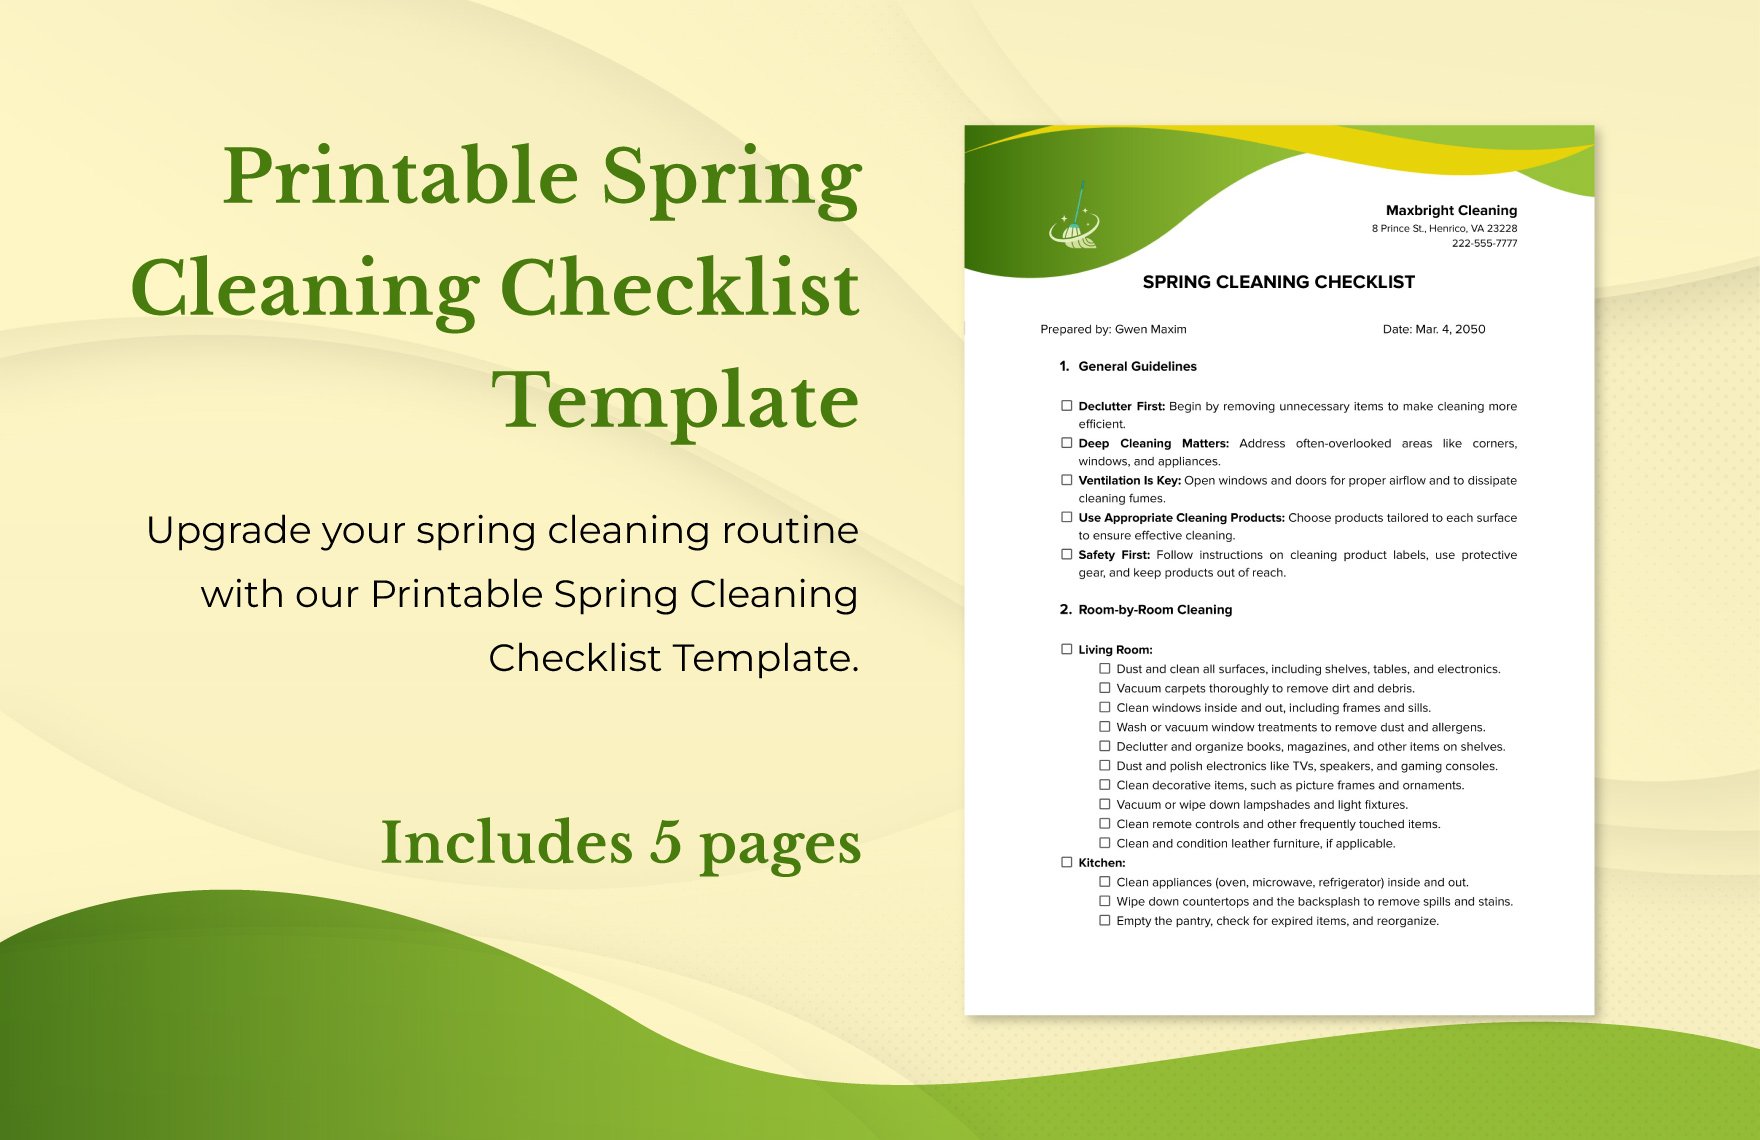 Printable Spring Cleaning Checklist Template